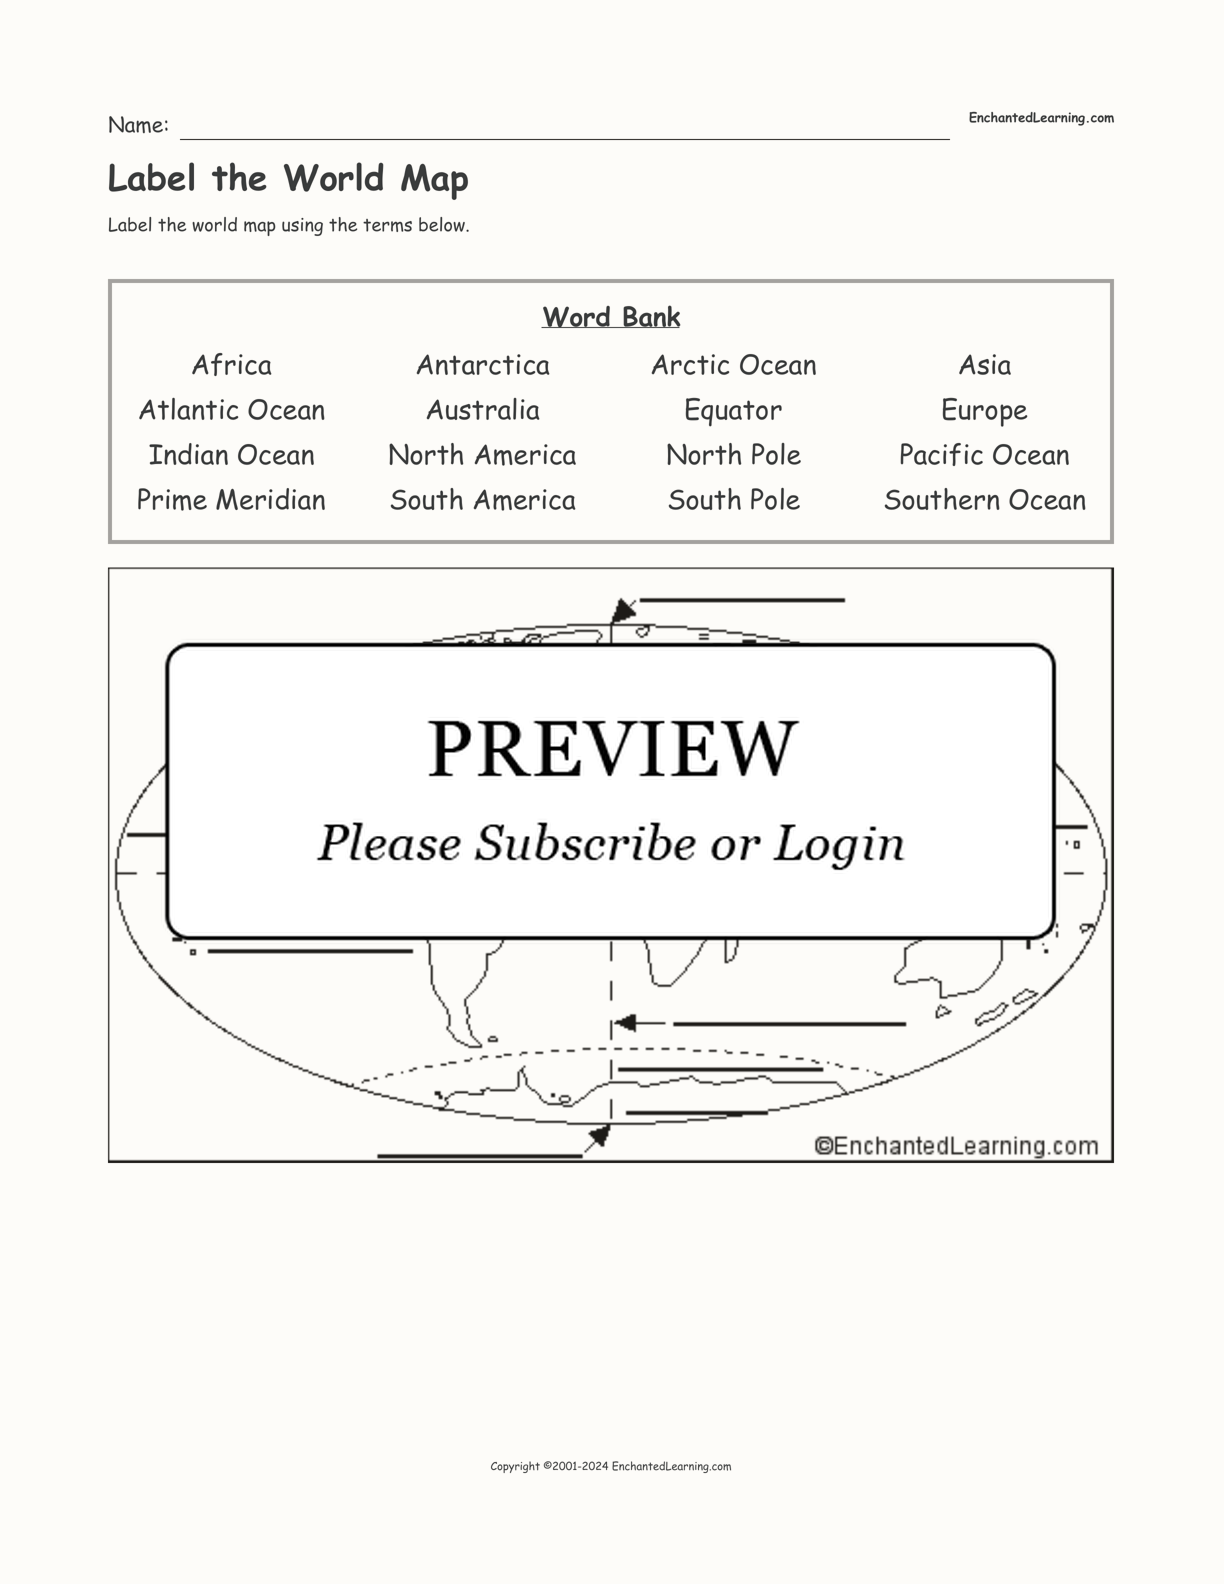 Label the World Map - Enchanted Learning Regarding Parts Of A Map Worksheet